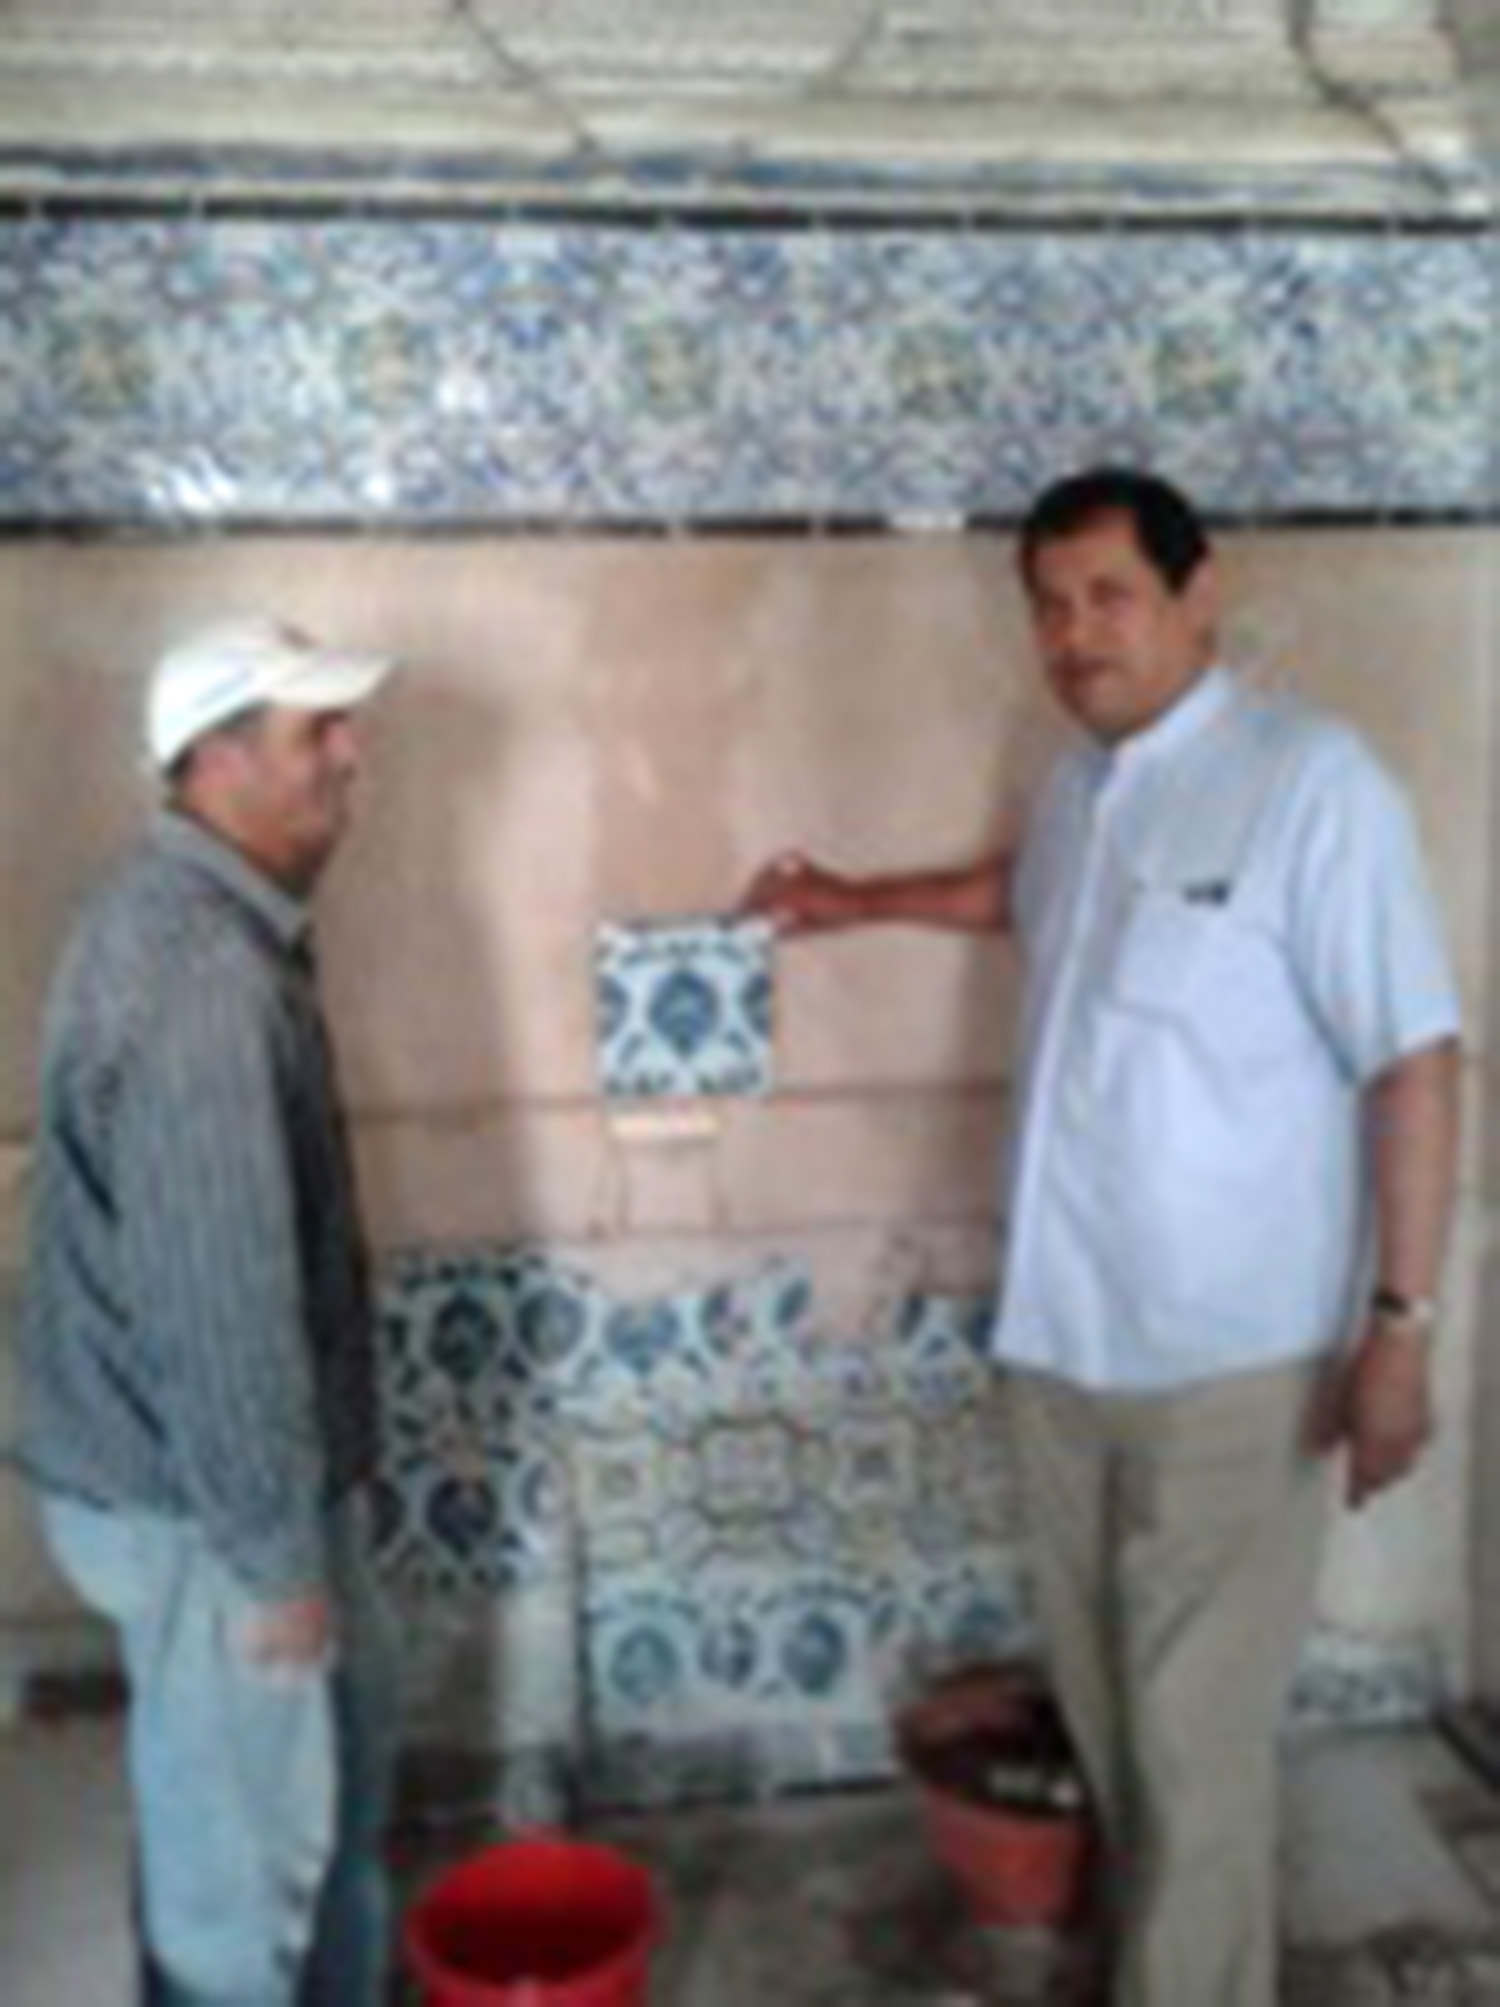 Restoration works, replacement of Iznik tiles in the "kbou" of room 3